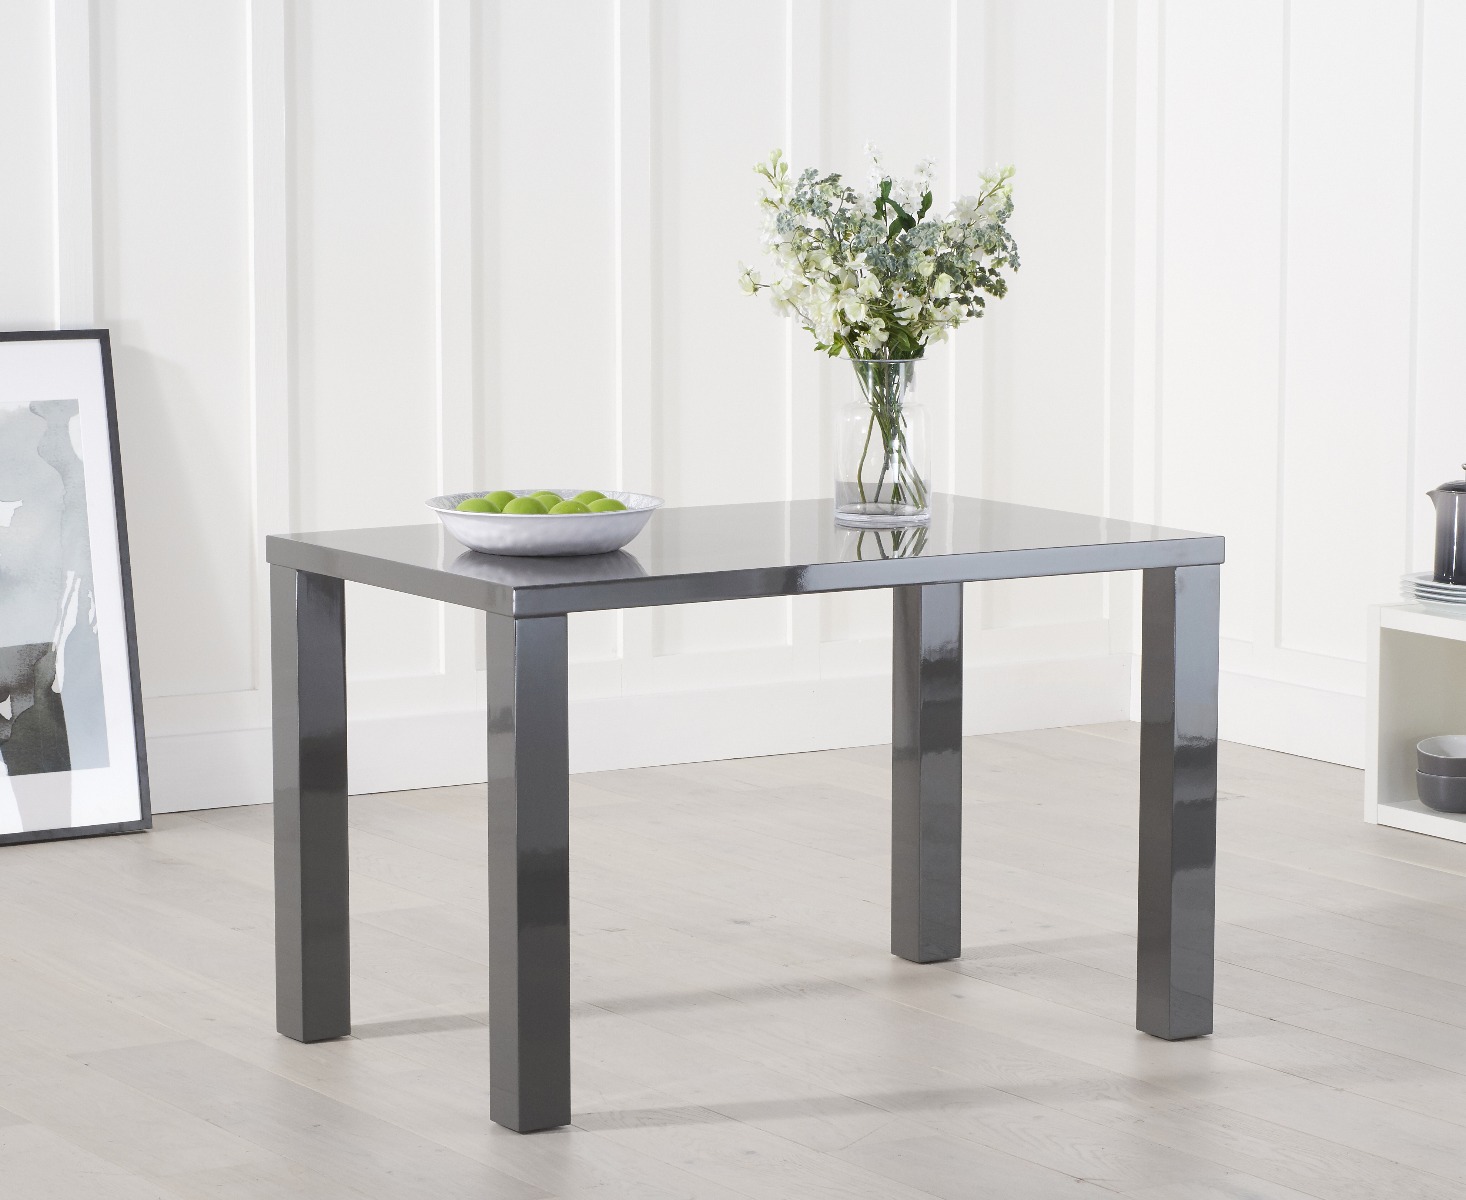 Photo 4 of Atlanta 120cm dark grey high gloss dining table with 6 grey gianni chairs